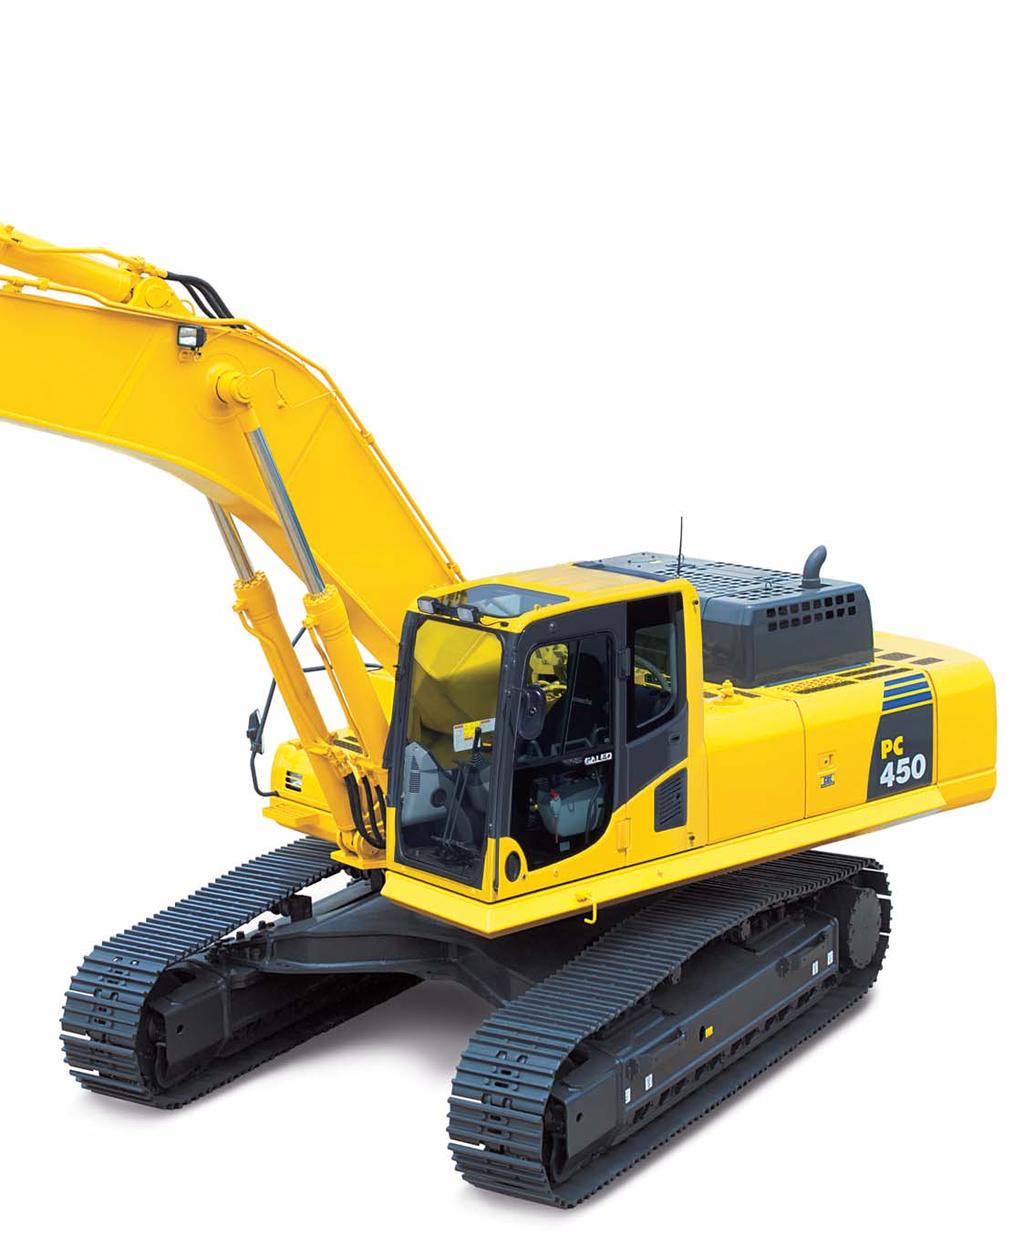 HYDRAULIC EXCAVATOR Ecology and Economy Features Low emission engine A powerful turbocharged and air to air aftercooled Komatsu SA